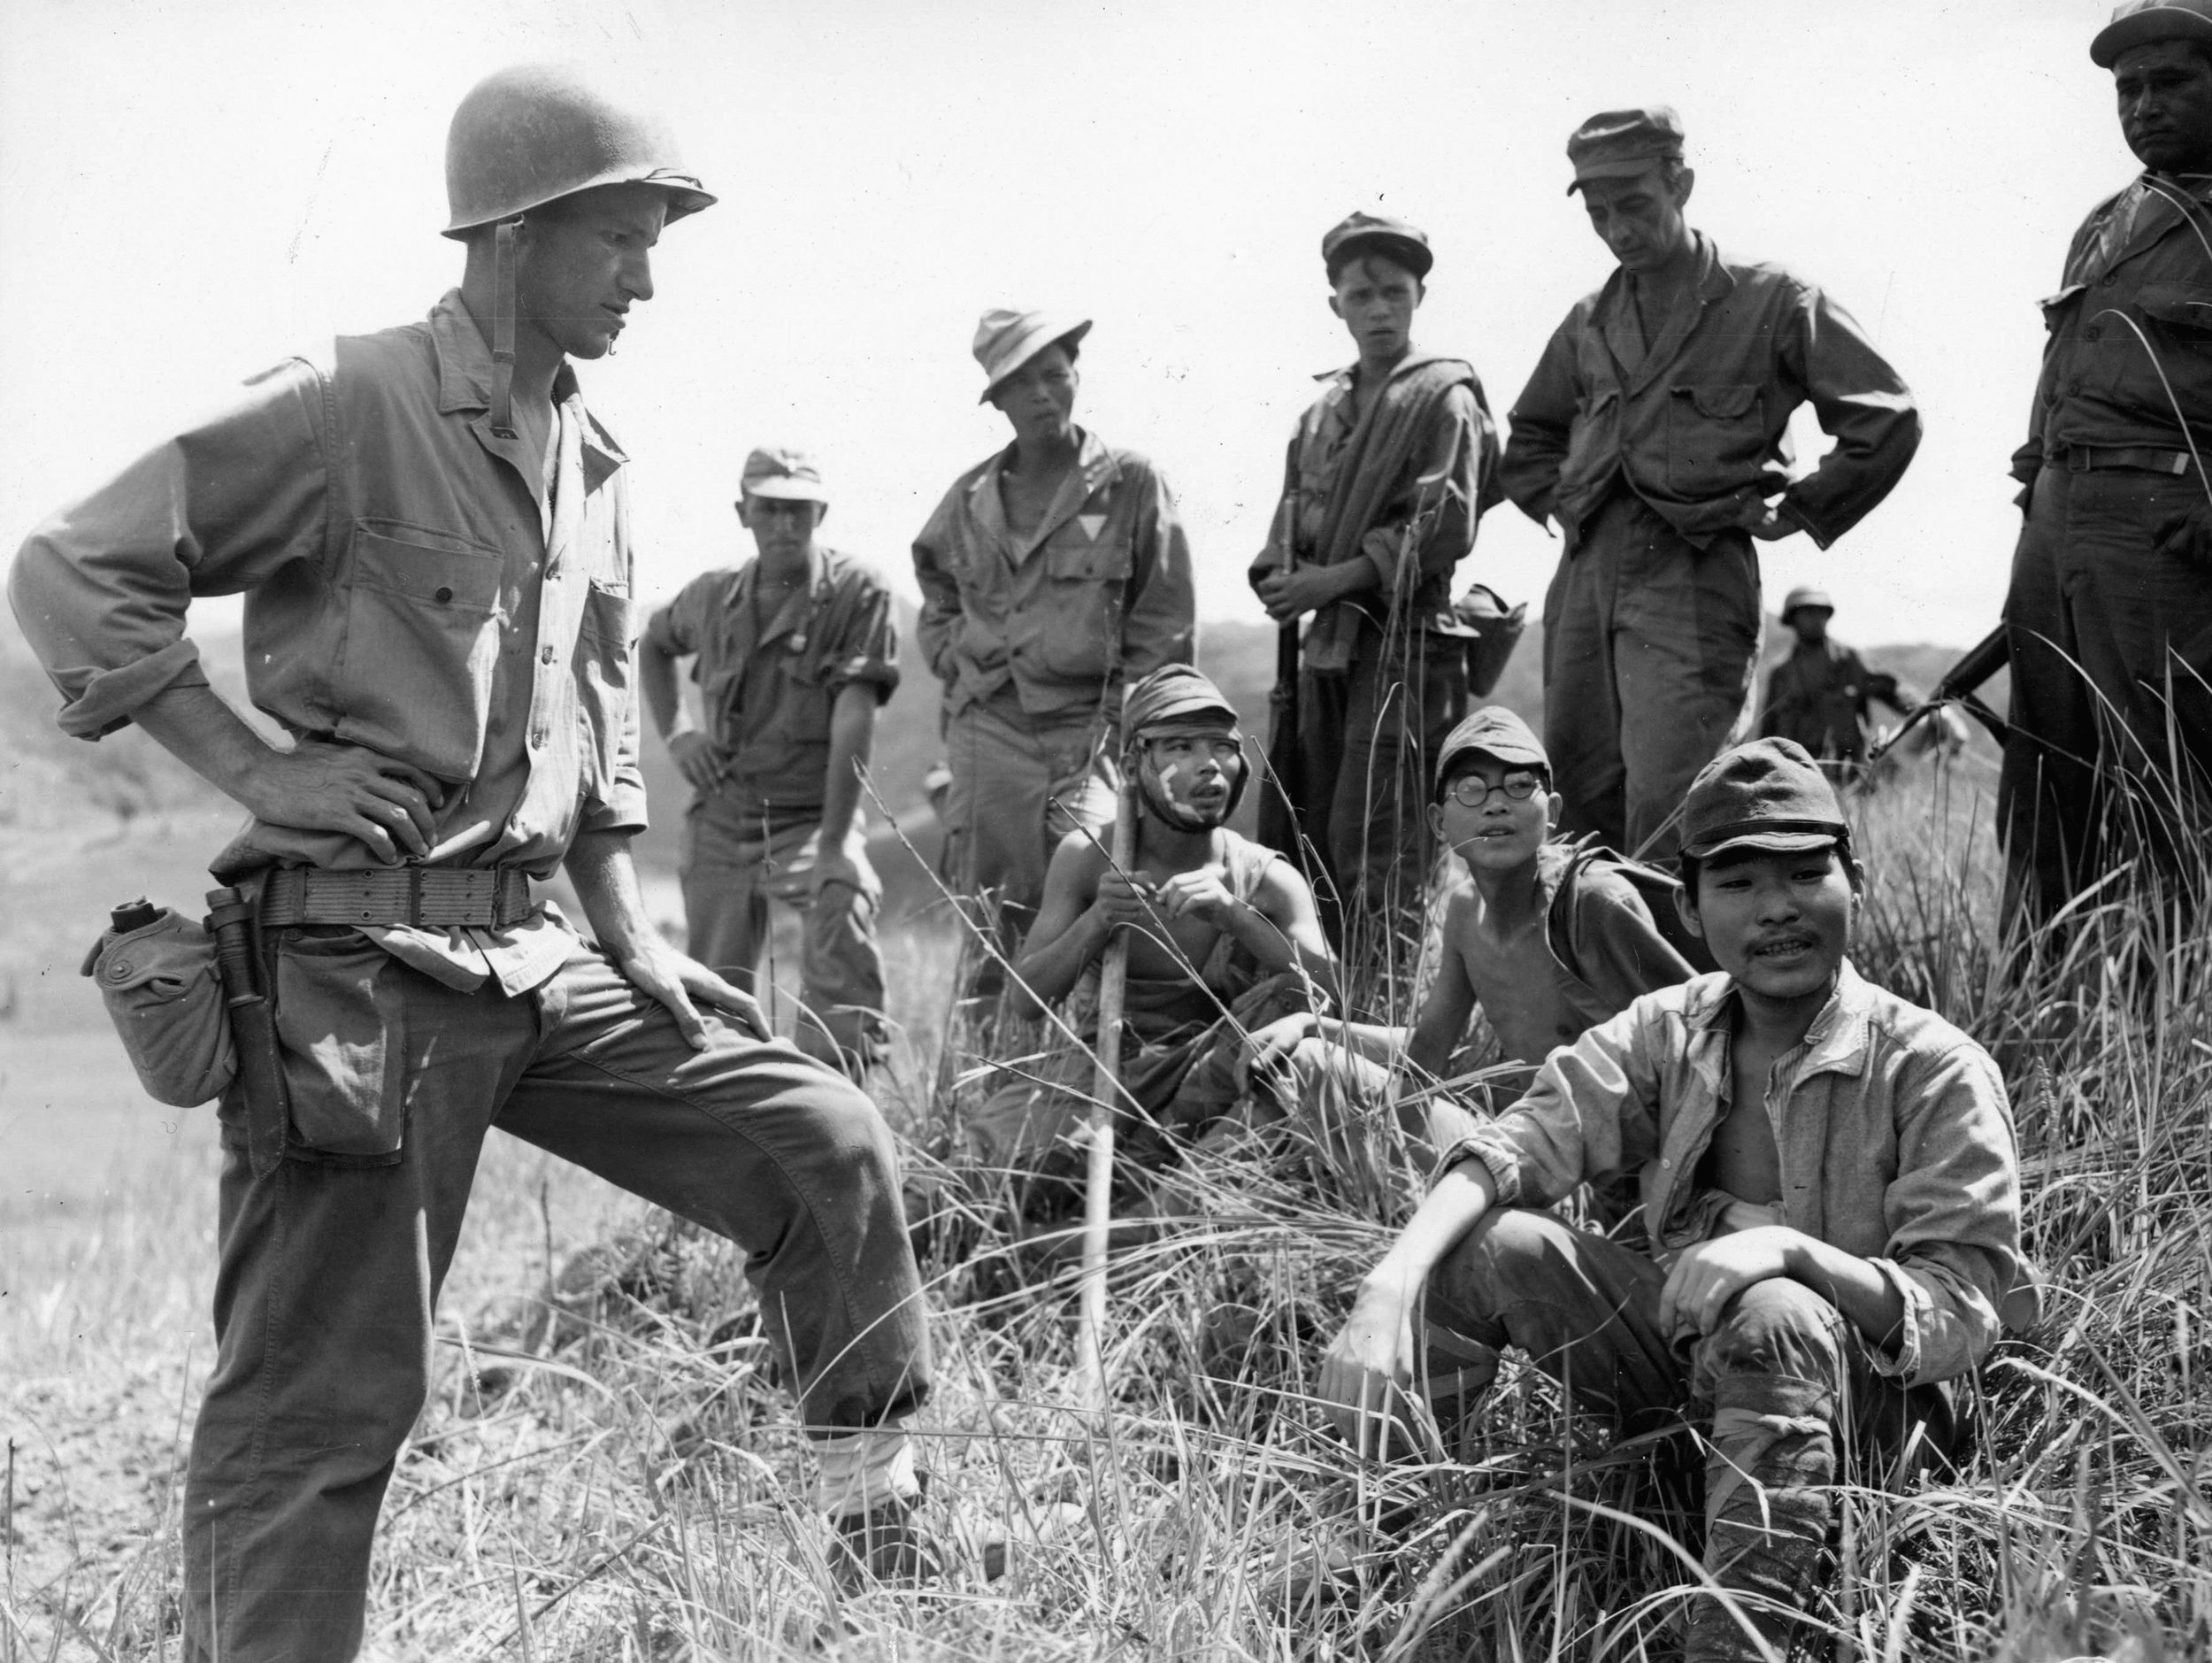 A rare sight, three Japanese prisoners captured during the fighting around the Ipo Dam sit on the ground surrounded by their American captors. 